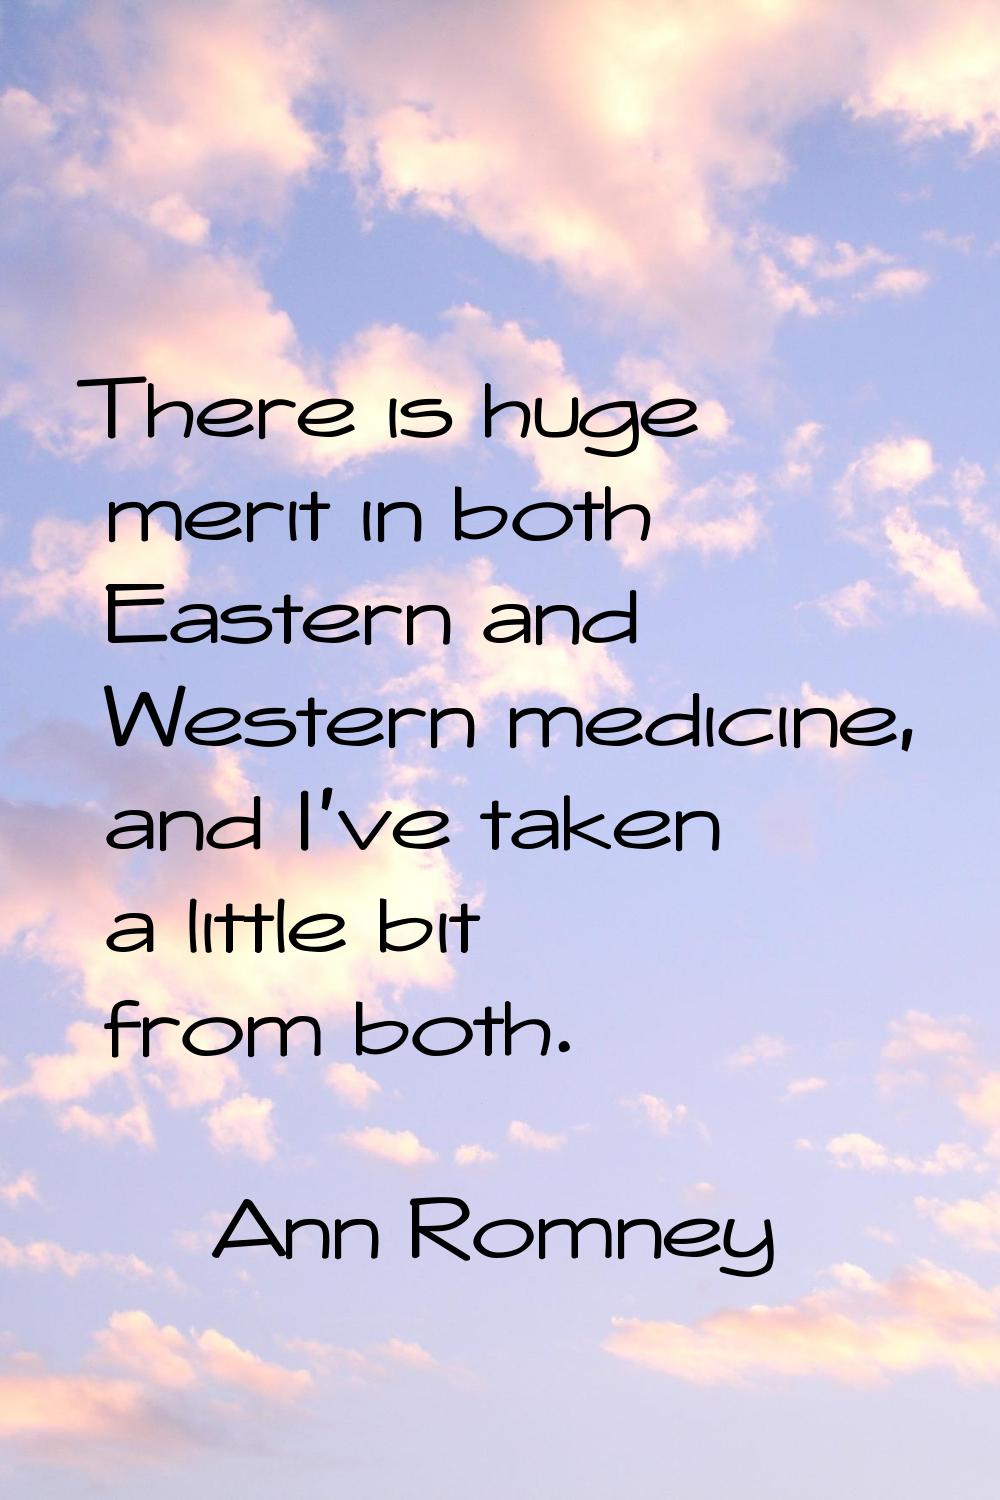 There is huge merit in both Eastern and Western medicine, and I've taken a little bit from both.